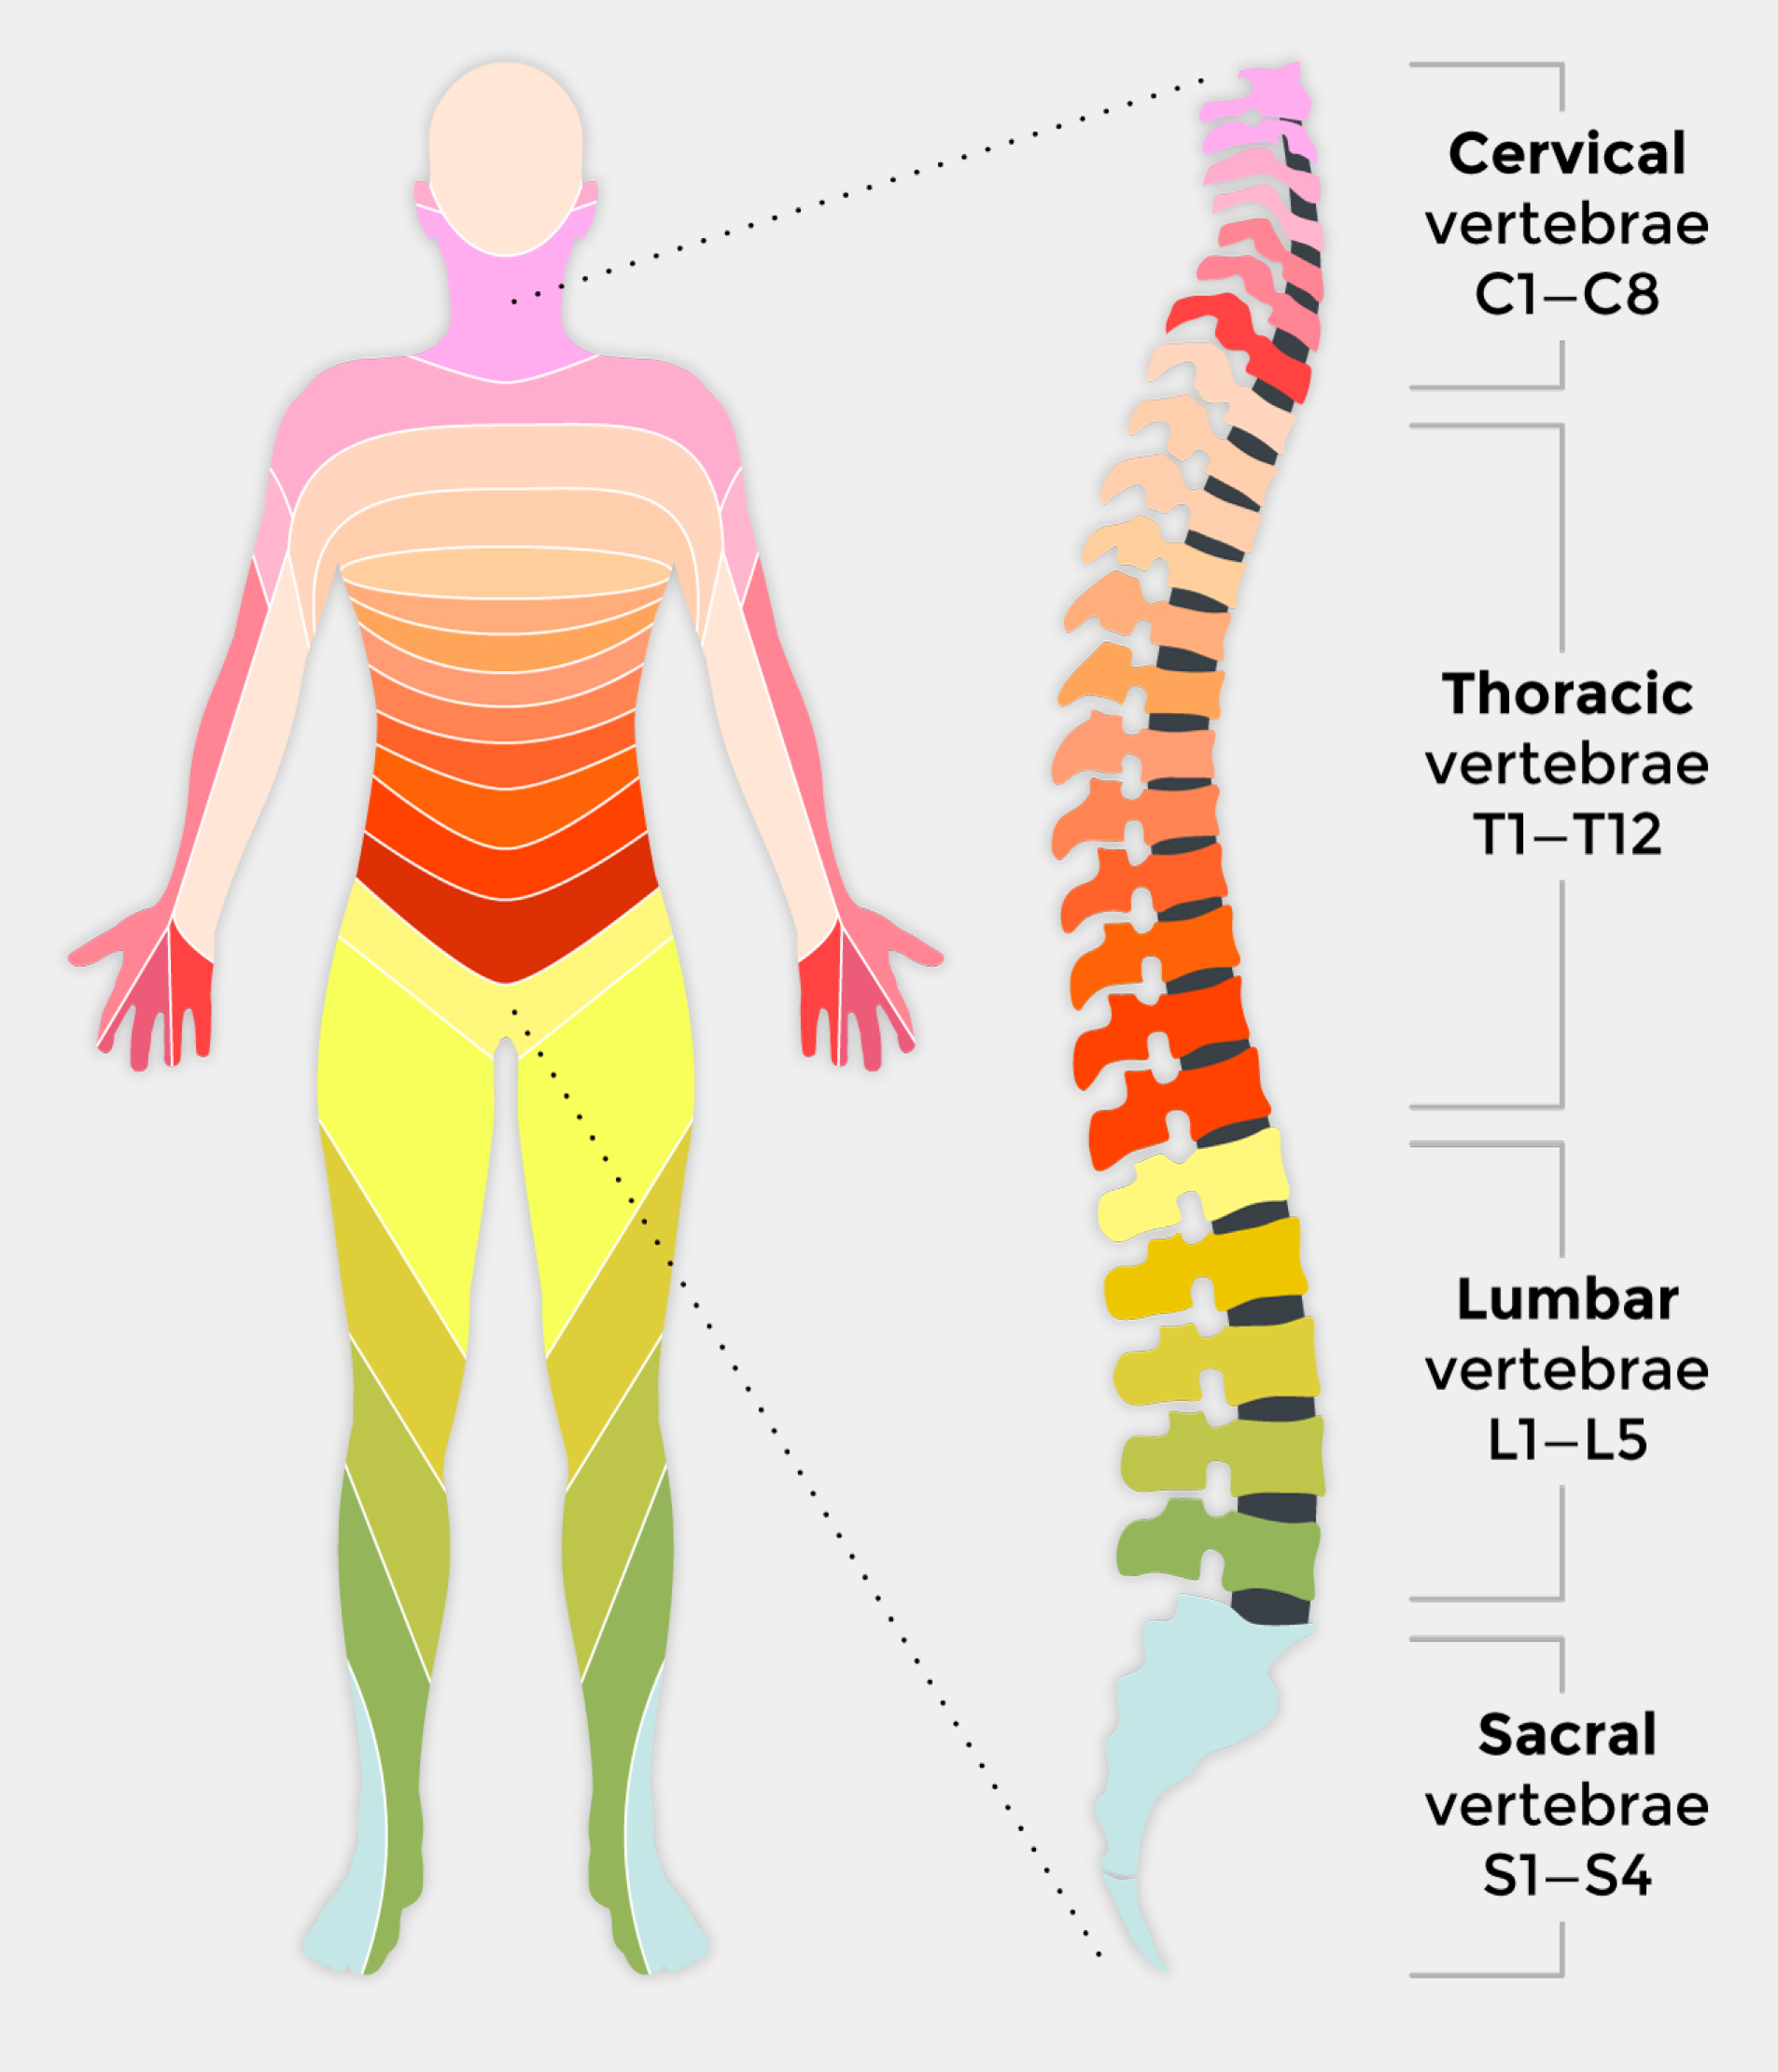 Spinal Cord Diagram Spinal Cord Injury And How It Affects People Back Up